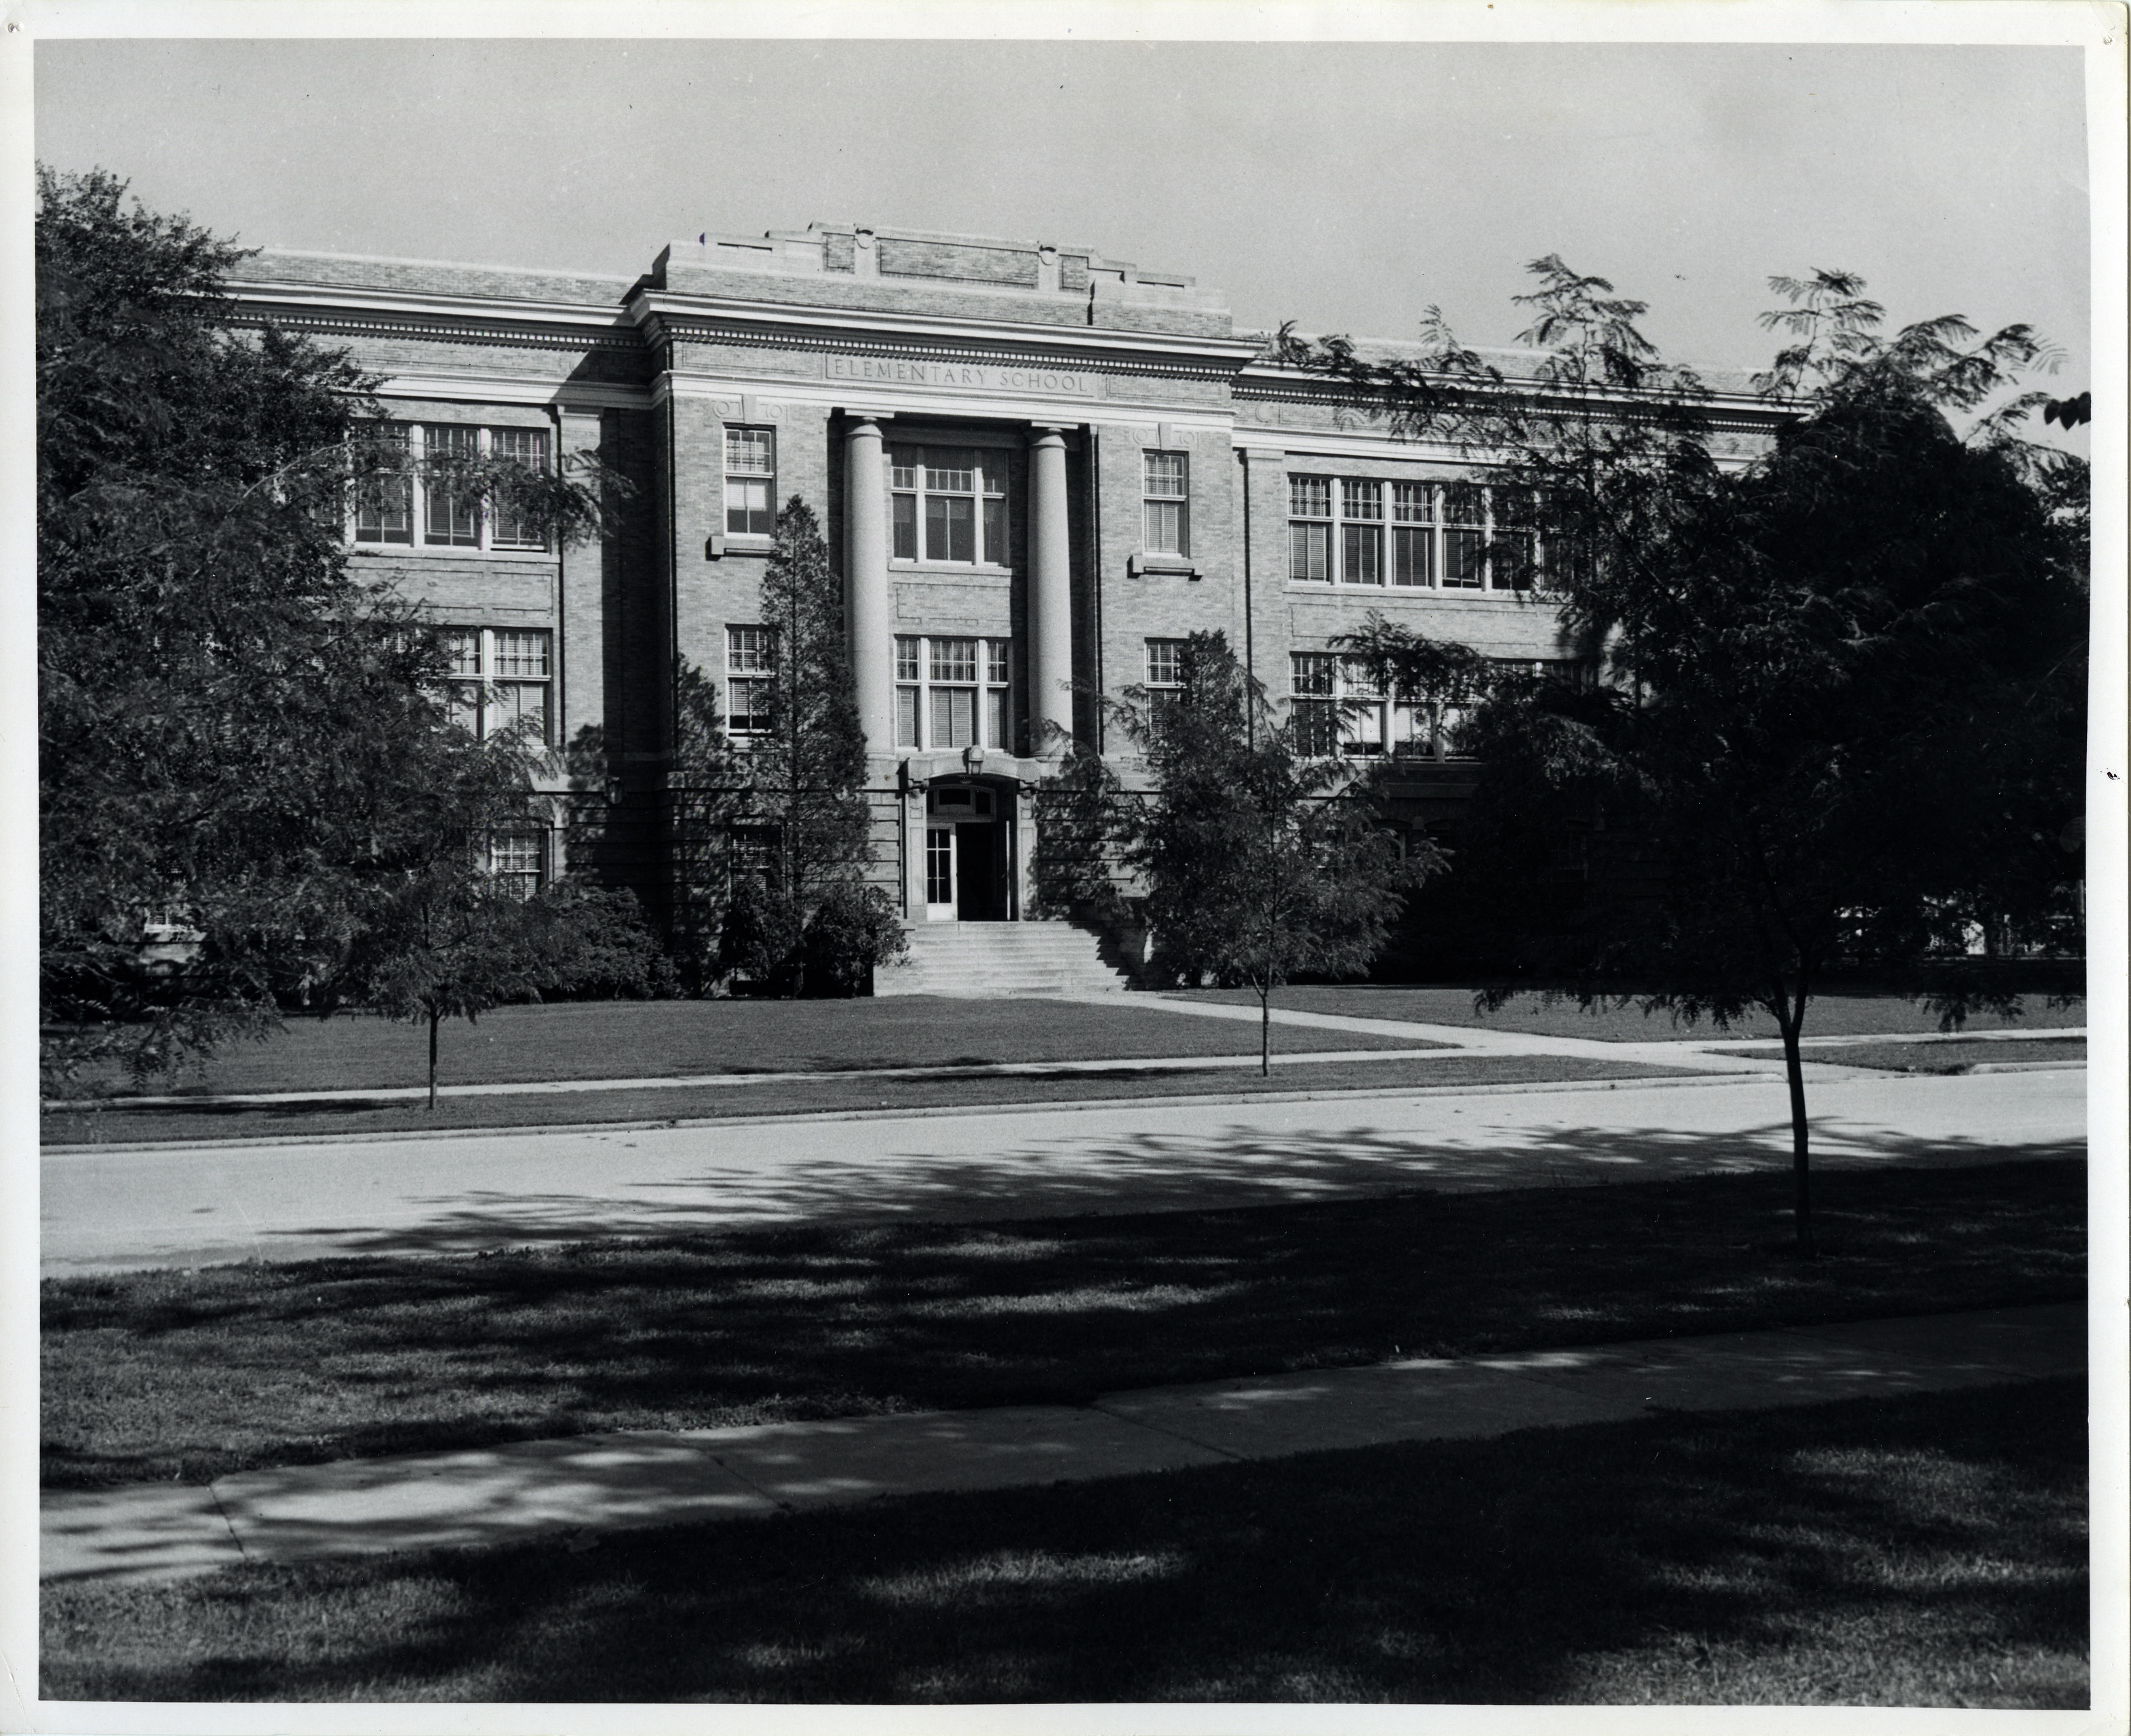 Iconic campus photo of the Elementary School along the once tree-lined street.